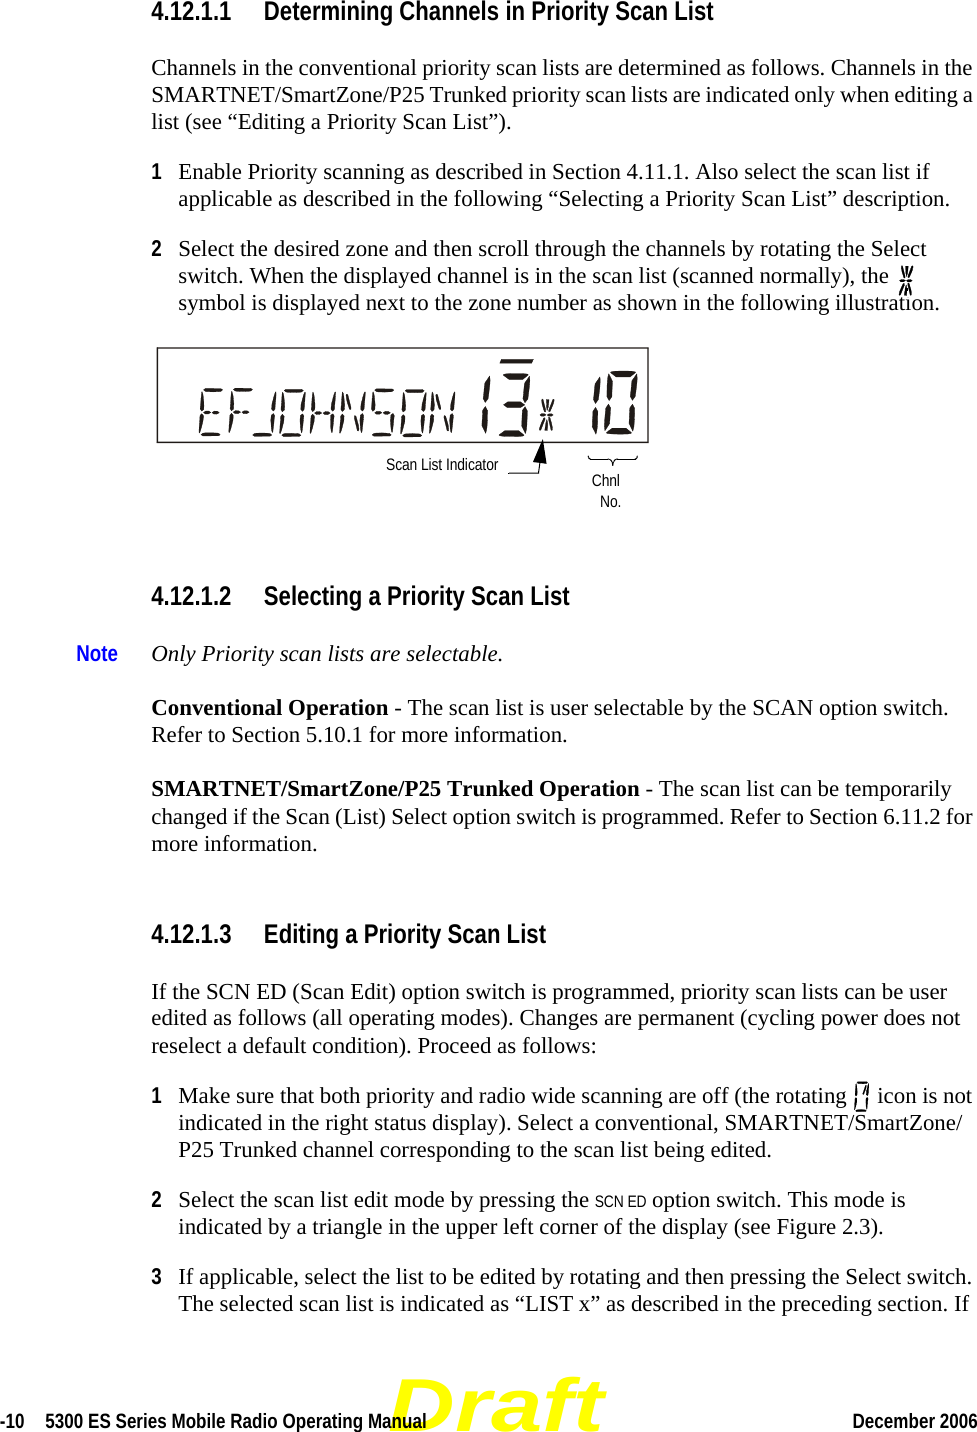 Draft-10  5300 ES Series Mobile Radio Operating Manual December 2006 4.12.1.1 Determining Channels in Priority Scan ListChannels in the conventional priority scan lists are determined as follows. Channels in the SMARTNET/SmartZone/P25 Trunked priority scan lists are indicated only when editing a list (see “Editing a Priority Scan List”).1Enable Priority scanning as described in Section 4.11.1. Also select the scan list if applicable as described in the following “Selecting a Priority Scan List” description. 2Select the desired zone and then scroll through the channels by rotating the Select switch. When the displayed channel is in the scan list (scanned normally), the   symbol is displayed next to the zone number as shown in the following illustration. 4.12.1.2 Selecting a Priority Scan ListNote Only Priority scan lists are selectable.Conventional Operation - The scan list is user selectable by the SCAN option switch. Refer to Section 5.10.1 for more information.SMARTNET/SmartZone/P25 Trunked Operation - The scan list can be temporarily changed if the Scan (List) Select option switch is programmed. Refer to Section 6.11.2 for more information.4.12.1.3 Editing a Priority Scan ListIf the SCN ED (Scan Edit) option switch is programmed, priority scan lists can be user edited as follows (all operating modes). Changes are permanent (cycling power does not reselect a default condition). Proceed as follows:1Make sure that both priority and radio wide scanning are off (the rotating   icon is not indicated in the right status display). Select a conventional, SMARTNET/SmartZone/P25 Trunked channel corresponding to the scan list being edited.2Select the scan list edit mode by pressing the SCN ED option switch. This mode is indicated by a triangle in the upper left corner of the display (see Figure 2.3).3If applicable, select the list to be edited by rotating and then pressing the Select switch. The selected scan list is indicated as “LIST x” as described in the preceding section. If Scan List Indicator ChnlNo.